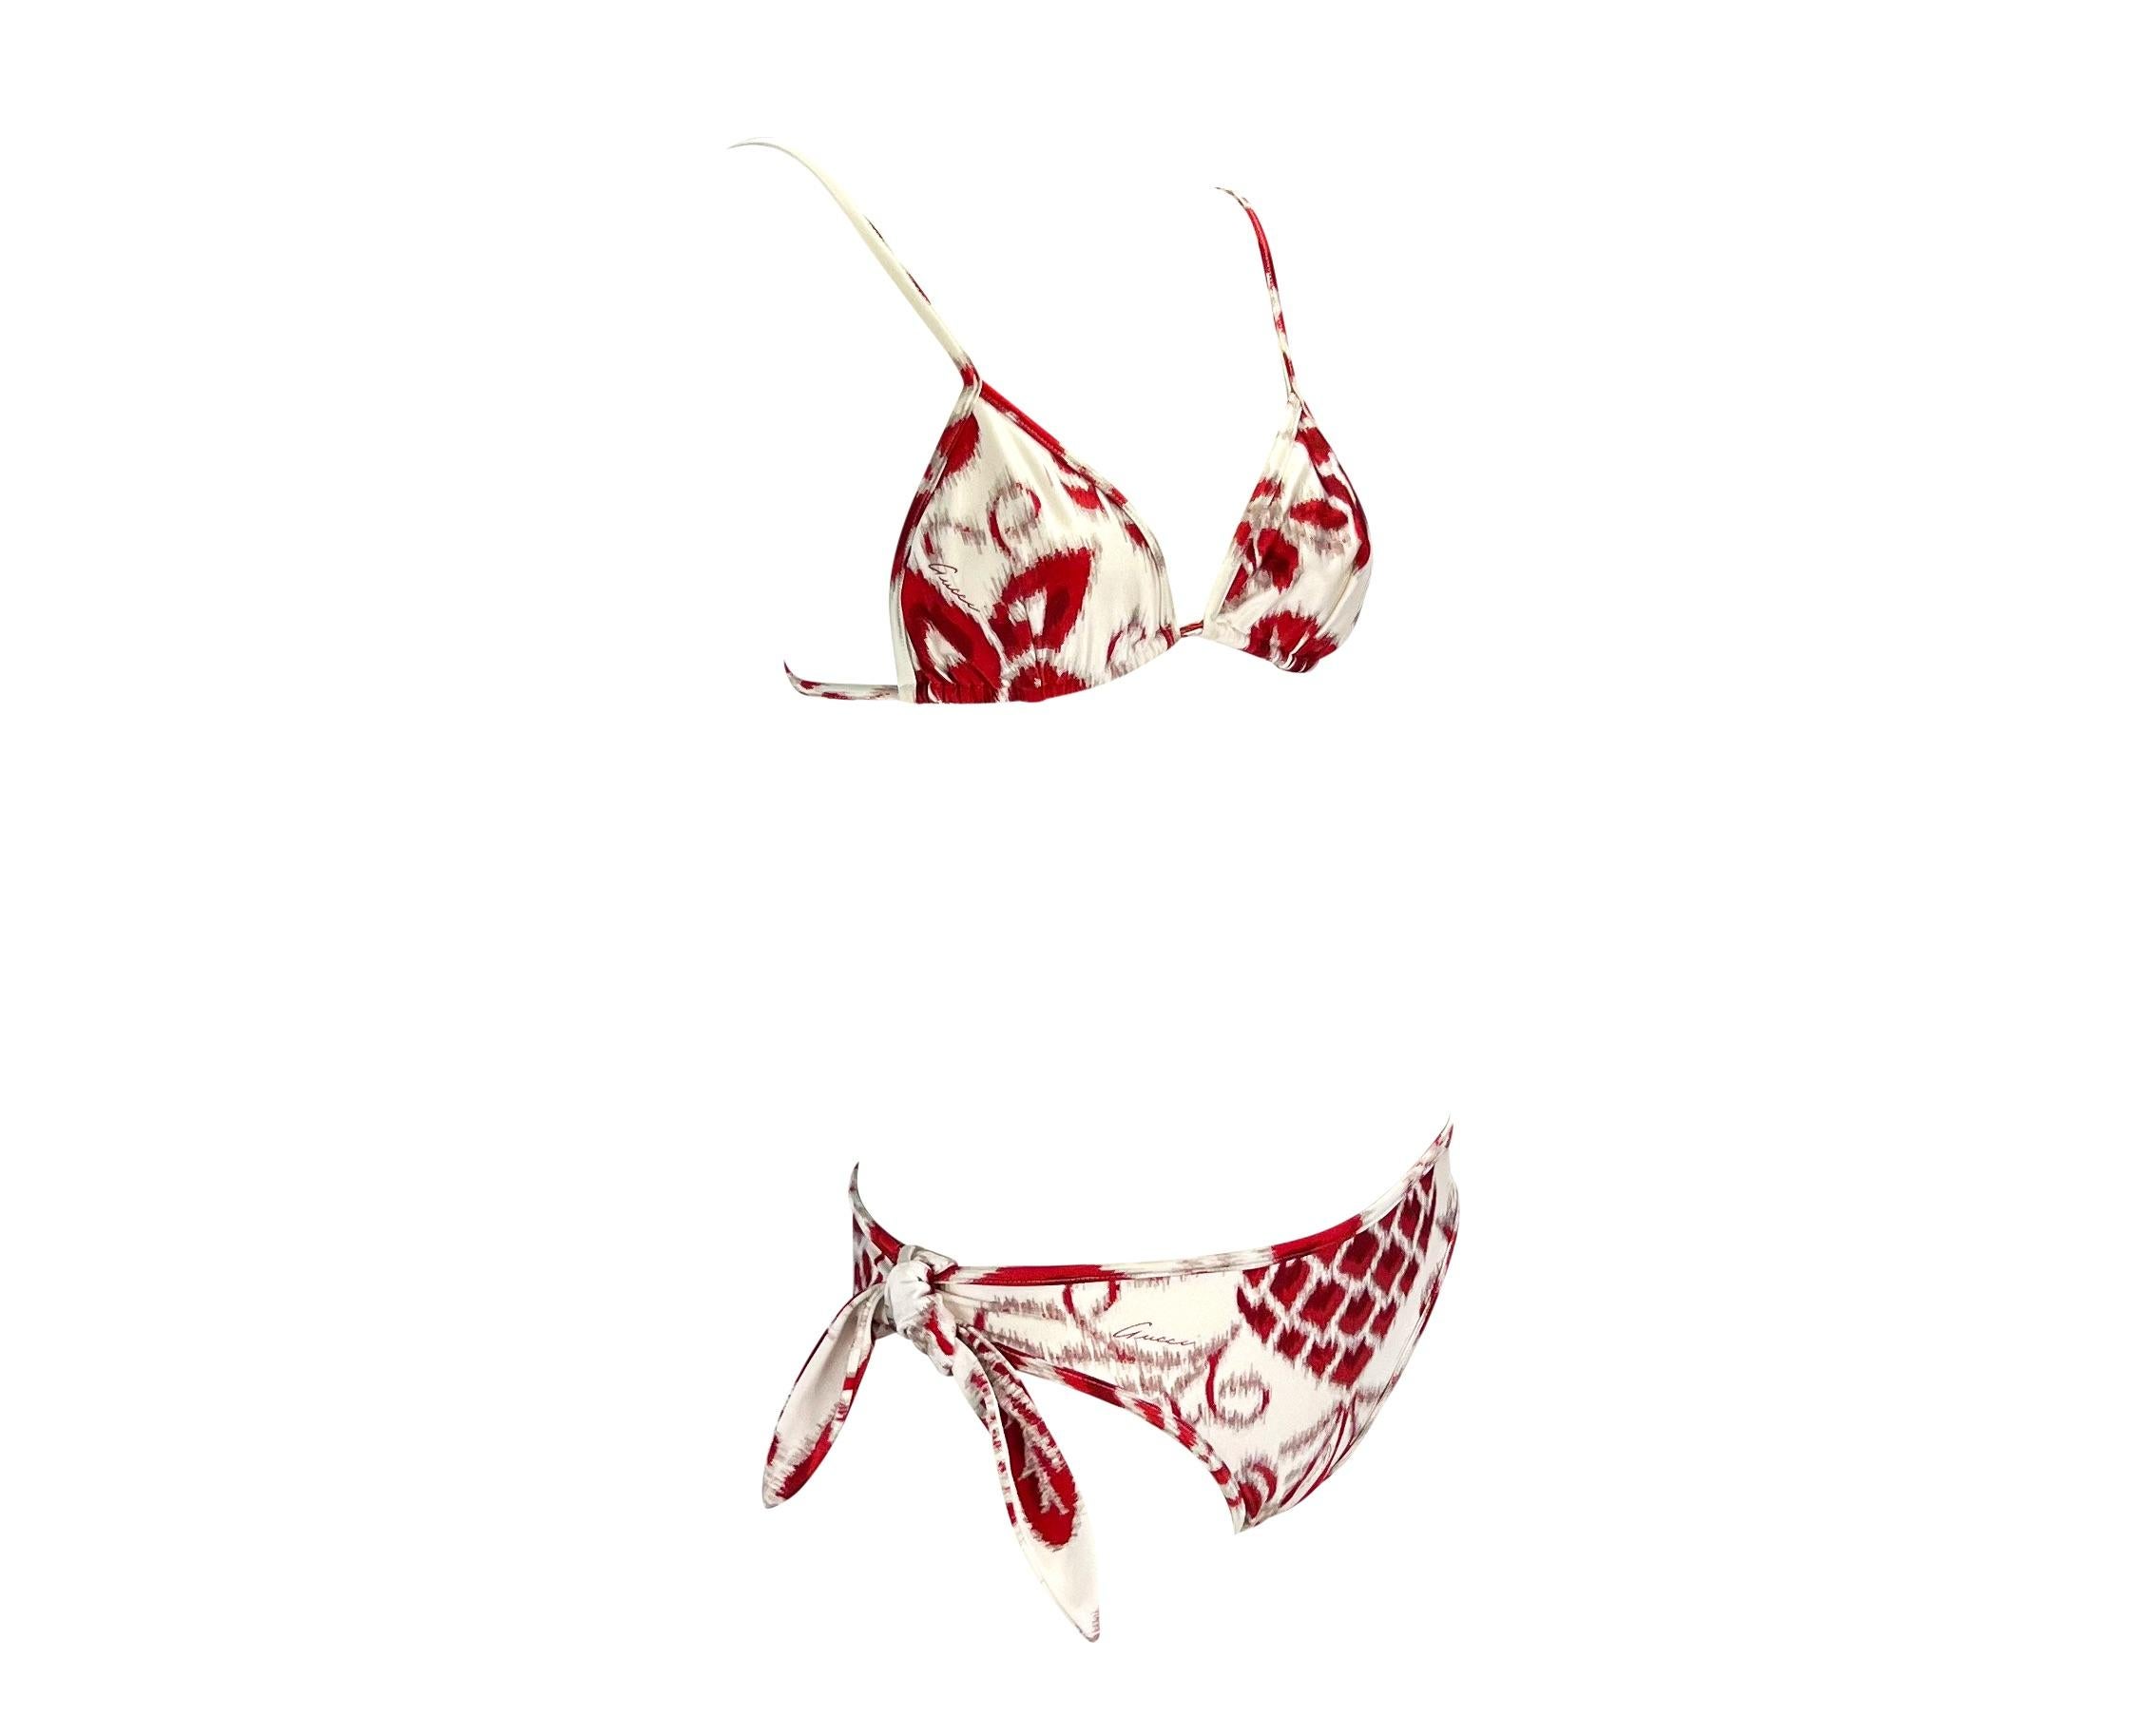 Presenting a gorgeous red 'Havana' print Gucci bikini, designed by Tom Ford. From the Spring/Summer 2000 collection, this pattern debuted on the men's runway but was used for many women's pieces. Both the top and bottom feature a red floral print